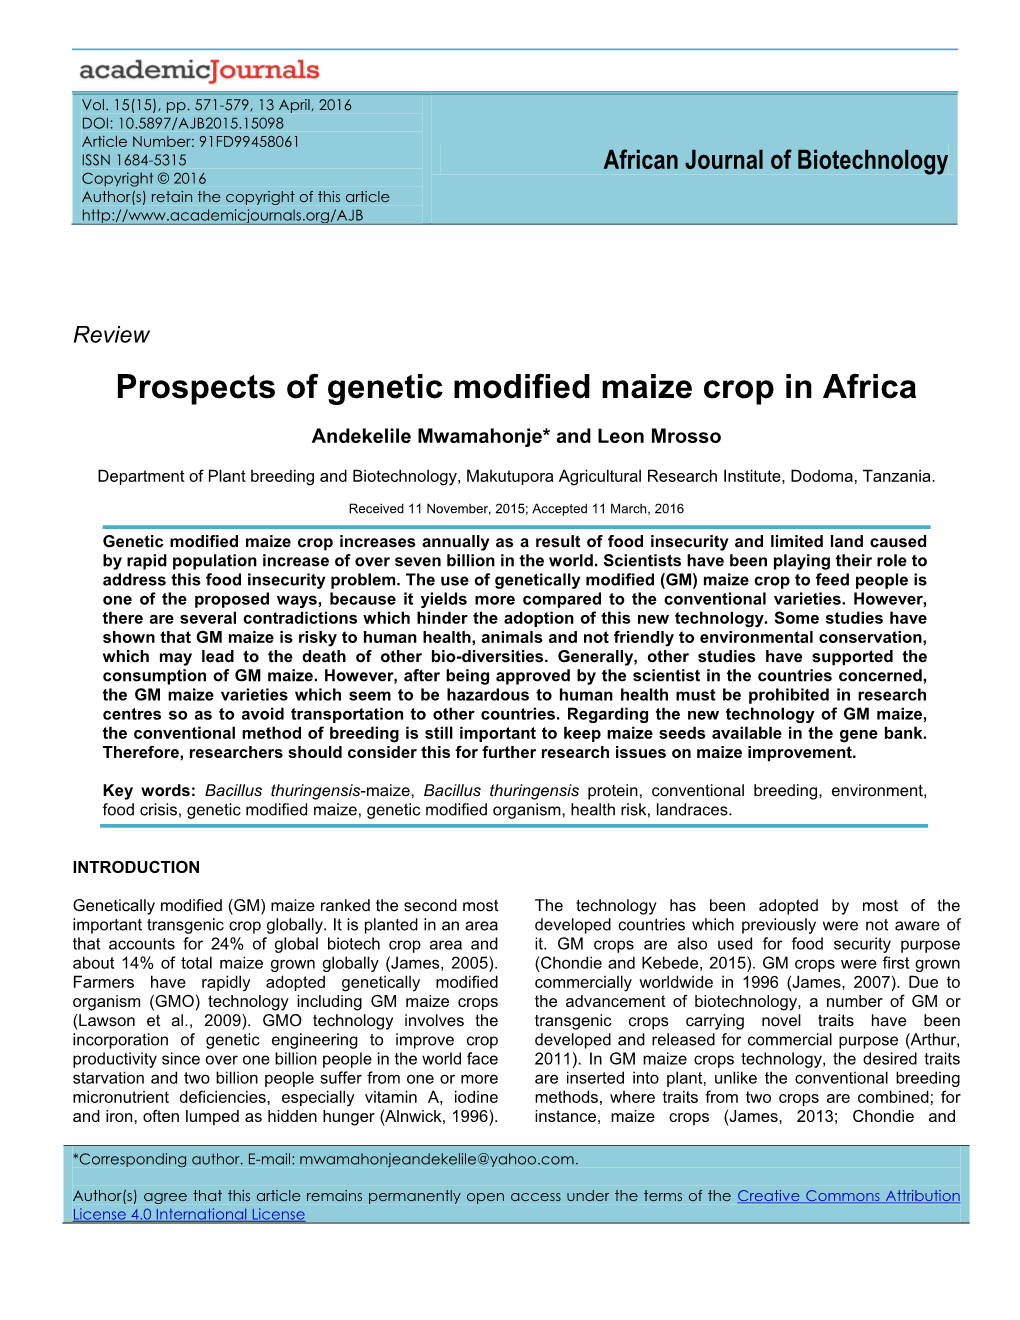 Prospects of Genetic Modified Maize Crop in Africa